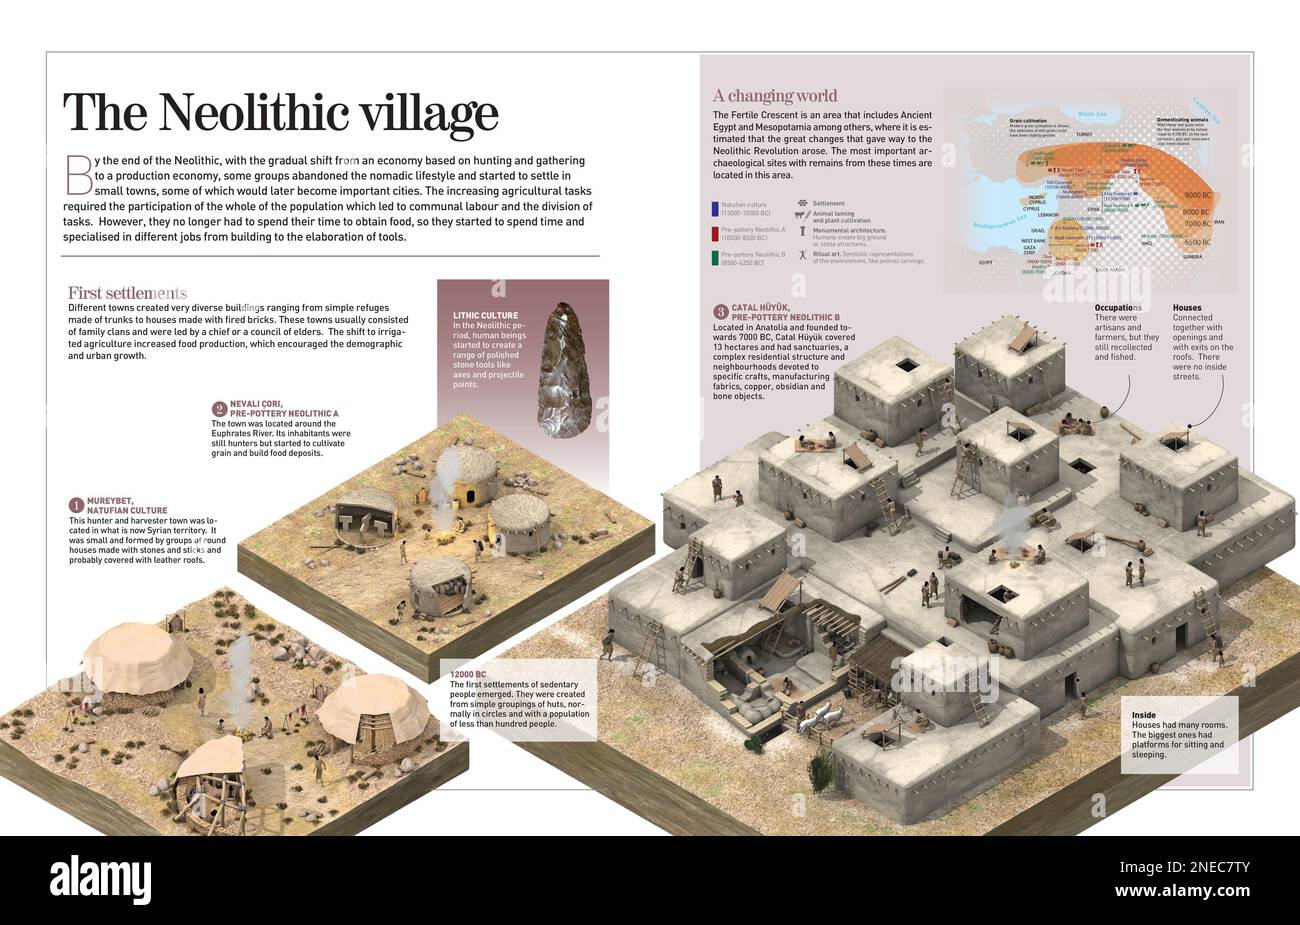 Infographic about the first Neolithic villages: Catal Hüyük, Nevali Cori and Mureybet, that emerged when nomadism disappeared giving way to sedentarism. [Adobe InDesign (.indd); 4960x8503]. Stock Photo